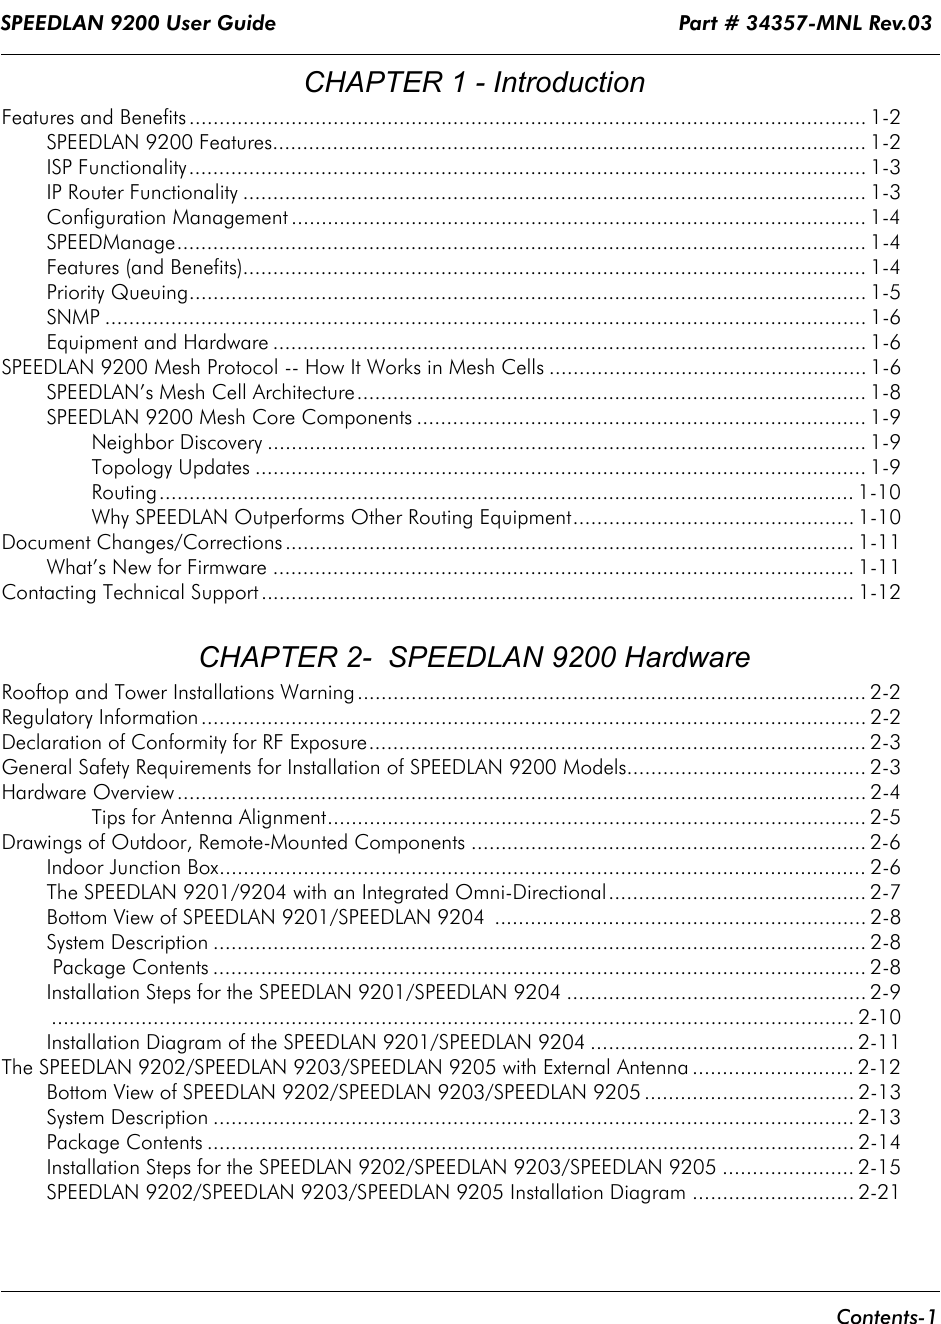 SPEEDLAN 9200 User Guide                                                                 Part # 34357-MNL Rev.03      Contents-1                                                                                                                                                                        CHAPTER 1 - IntroductionFeatures and Benefits ................................................................................................................. 1-2SPEEDLAN 9200 Features................................................................................................... 1-2ISP Functionality................................................................................................................. 1-3IP Router Functionality ........................................................................................................ 1-3Configuration Management ................................................................................................ 1-4SPEEDManage................................................................................................................... 1-4Features (and Benefits)........................................................................................................ 1-4Priority Queuing................................................................................................................. 1-5SNMP ............................................................................................................................... 1-6Equipment and Hardware ................................................................................................... 1-6SPEEDLAN 9200 Mesh Protocol -- How It Works in Mesh Cells ..................................................... 1-6SPEEDLAN’s Mesh Cell Architecture..................................................................................... 1-8SPEEDLAN 9200 Mesh Core Components ........................................................................... 1-9Neighbor Discovery .................................................................................................... 1-9Topology Updates ...................................................................................................... 1-9Routing.................................................................................................................... 1-10Why SPEEDLAN Outperforms Other Routing Equipment............................................... 1-10Document Changes/Corrections............................................................................................... 1-11What’s New for Firmware ................................................................................................. 1-11Contacting Technical Support ................................................................................................... 1-12 CHAPTER 2-  SPEEDLAN 9200 HardwareRooftop and Tower Installations Warning..................................................................................... 2-2Regulatory Information ............................................................................................................... 2-2Declaration of Conformity for RF Exposure................................................................................... 2-3General Safety Requirements for Installation of SPEEDLAN 9200 Models........................................ 2-3Hardware Overview ................................................................................................................... 2-4Tips for Antenna Alignment.......................................................................................... 2-5Drawings of Outdoor, Remote-Mounted Components .................................................................. 2-6Indoor Junction Box............................................................................................................ 2-6The SPEEDLAN 9201/9204 with an Integrated Omni-Directional........................................... 2-7Bottom View of SPEEDLAN 9201/SPEEDLAN 9204  .............................................................. 2-8System Description ............................................................................................................. 2-8 Package Contents ............................................................................................................. 2-8Installation Steps for the SPEEDLAN 9201/SPEEDLAN 9204 .................................................. 2-9...................................................................................................................................... 2-10Installation Diagram of the SPEEDLAN 9201/SPEEDLAN 9204 ............................................ 2-11The SPEEDLAN 9202/SPEEDLAN 9203/SPEEDLAN 9205 with External Antenna ........................... 2-12Bottom View of SPEEDLAN 9202/SPEEDLAN 9203/SPEEDLAN 9205 ................................... 2-13System Description ........................................................................................................... 2-13Package Contents ............................................................................................................ 2-14Installation Steps for the SPEEDLAN 9202/SPEEDLAN 9203/SPEEDLAN 9205 ...................... 2-15SPEEDLAN 9202/SPEEDLAN 9203/SPEEDLAN 9205 Installation Diagram ........................... 2-21